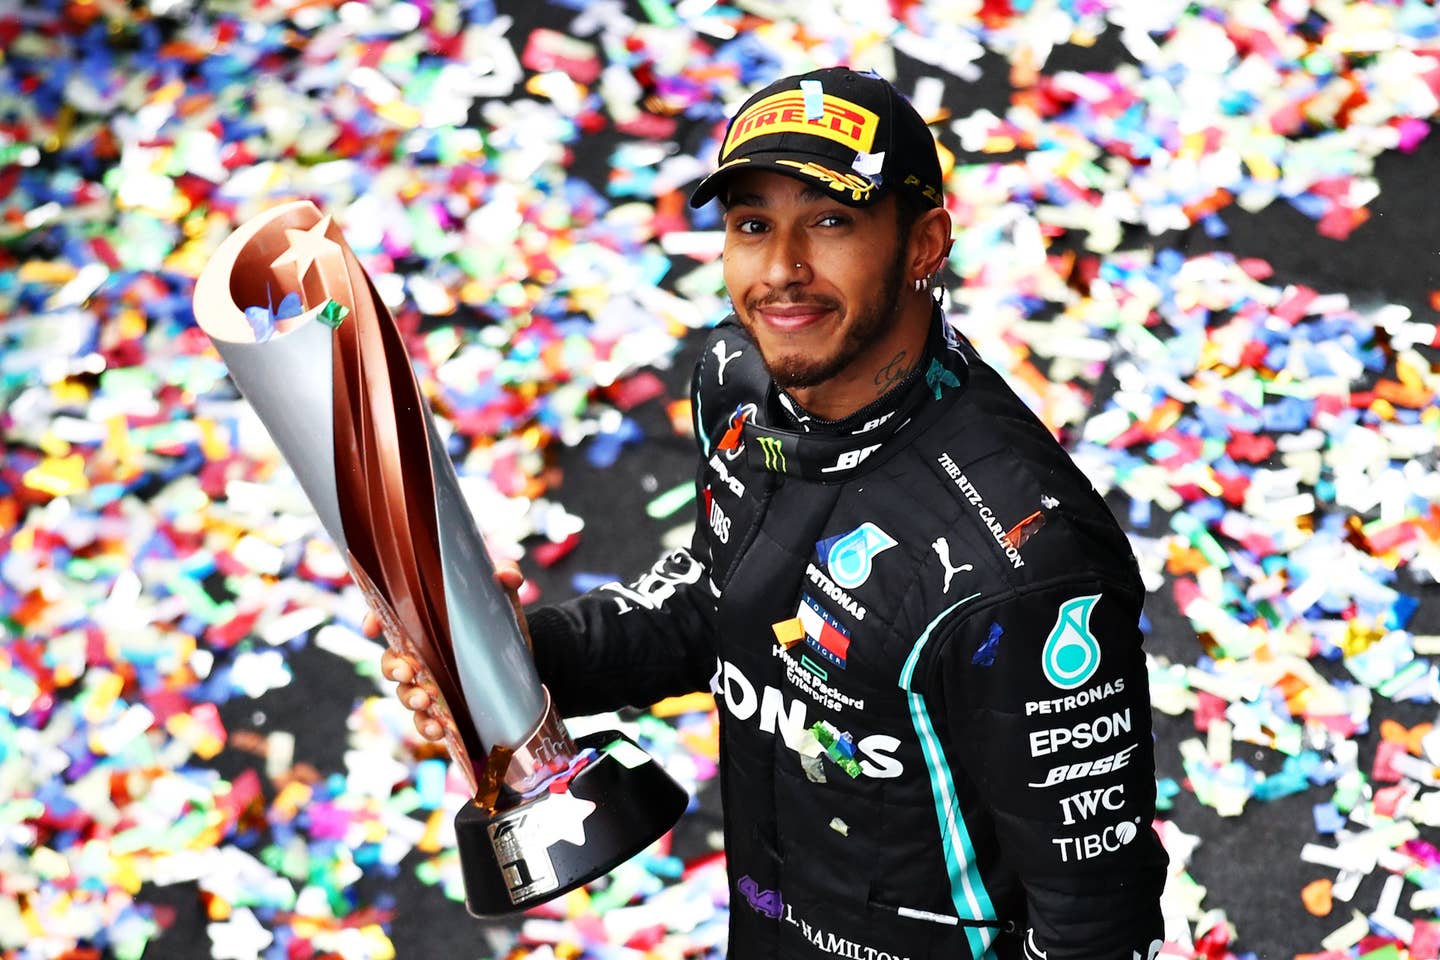 ISTANBUL, TURKEY - NOVEMBER 15: Race winner Lewis Hamilton of Great Britain and Mercedes GP celebrates winning a 7th F1 World Drivers Championship on the podium during the F1 Grand Prix of Turkey at Intercity Istanbul Park on November 15, 2020 in Istanbul, Turkey. (Photo by Bryn Lennon/Getty Images)